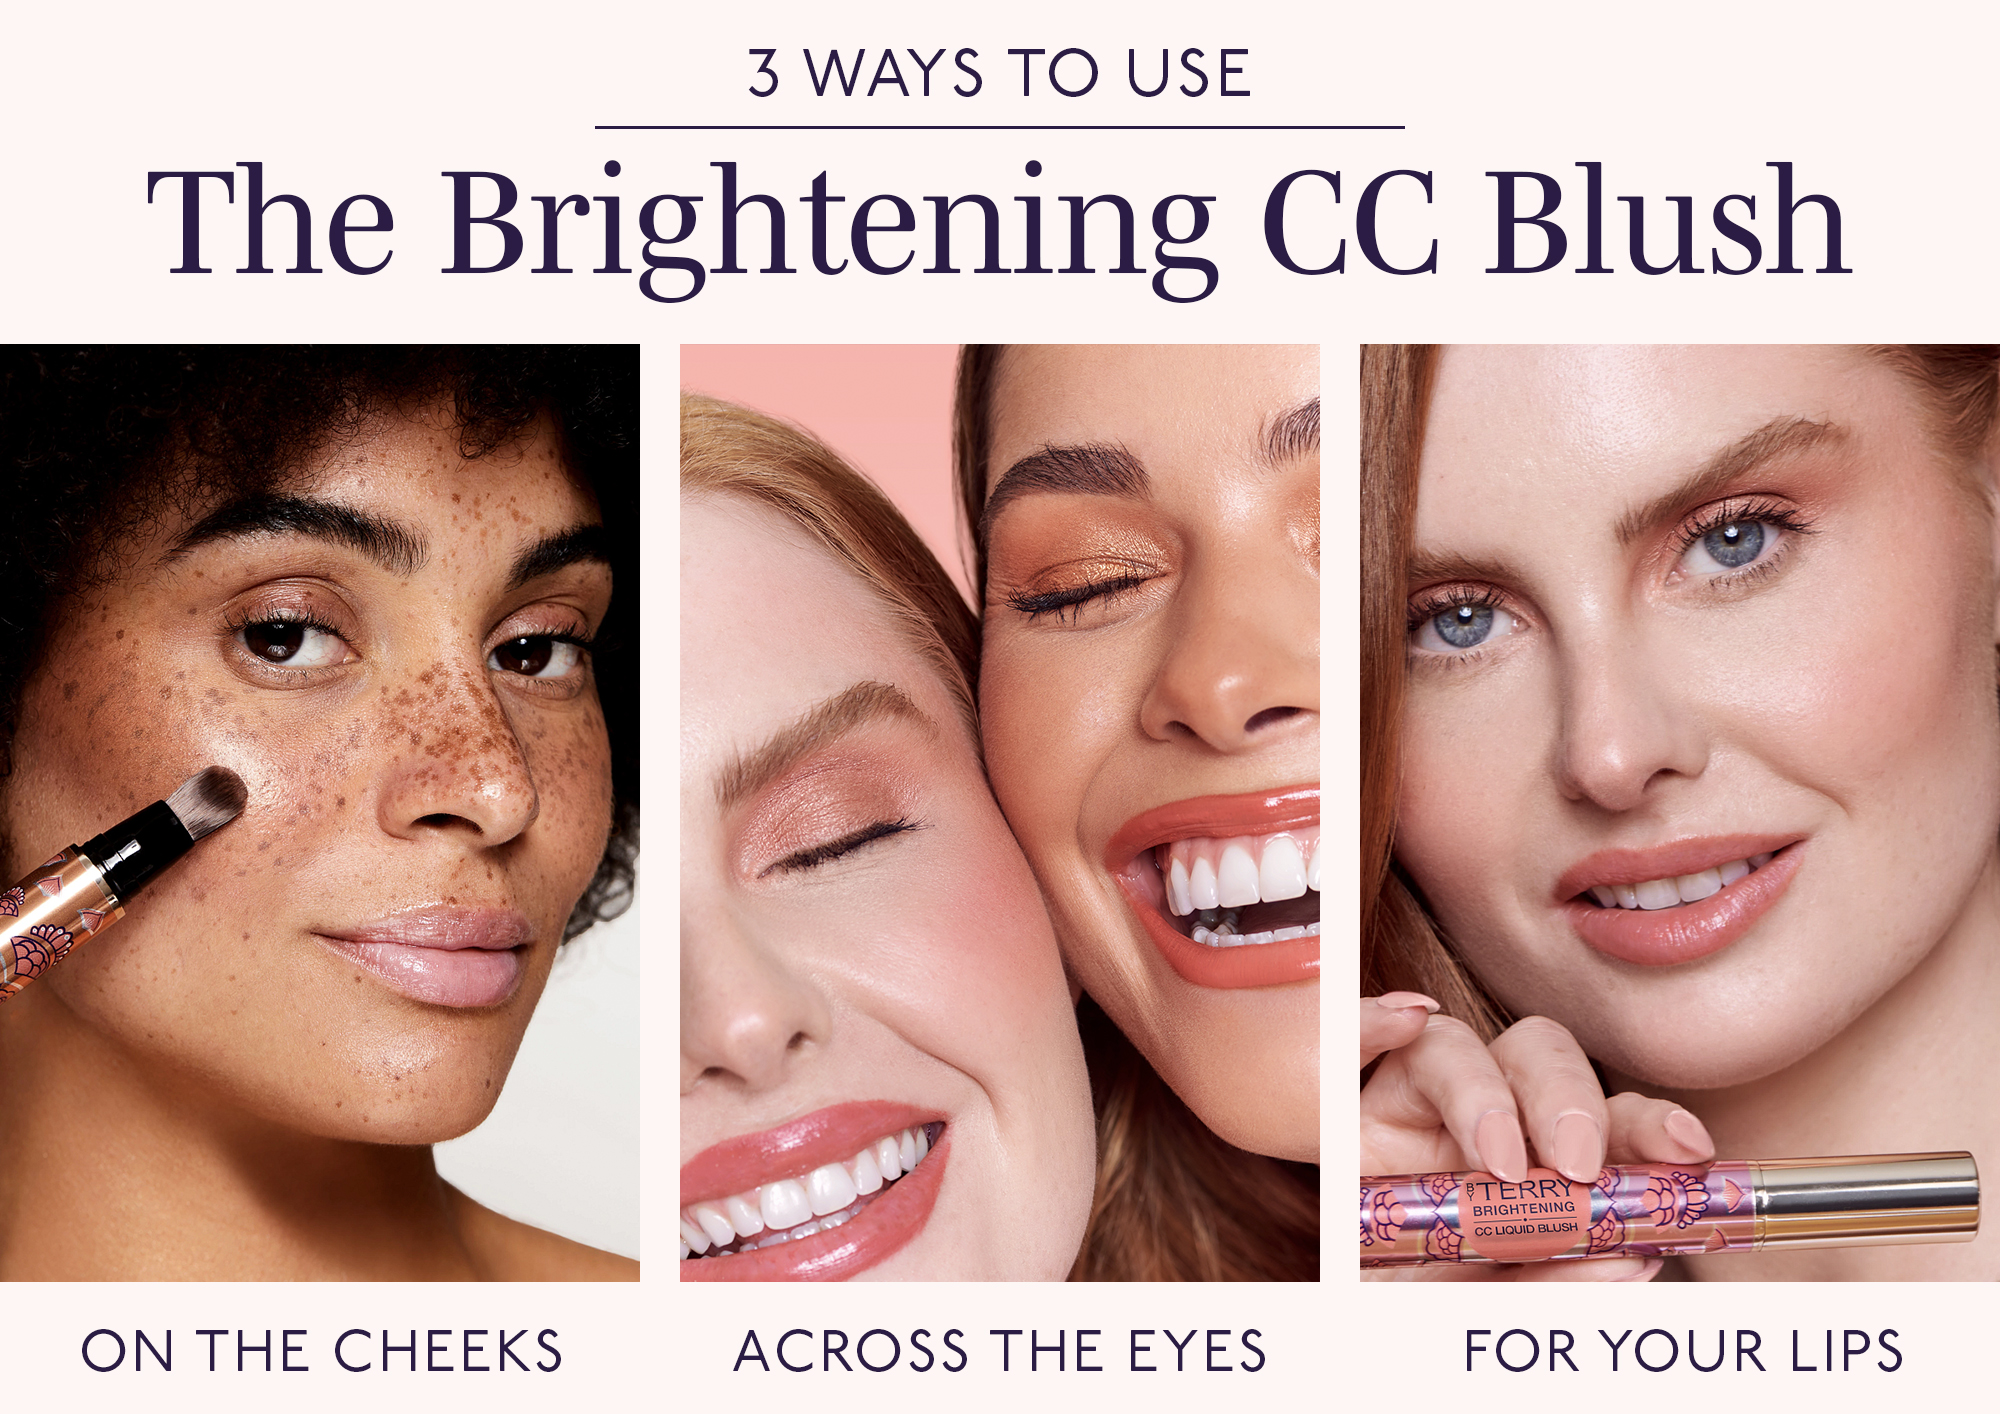 3 WAYS TO USE The Brightening ¢ Ce a BIUISEY ON THE CHEEKS ACROSS THE EYES FOR YOUR LIPS